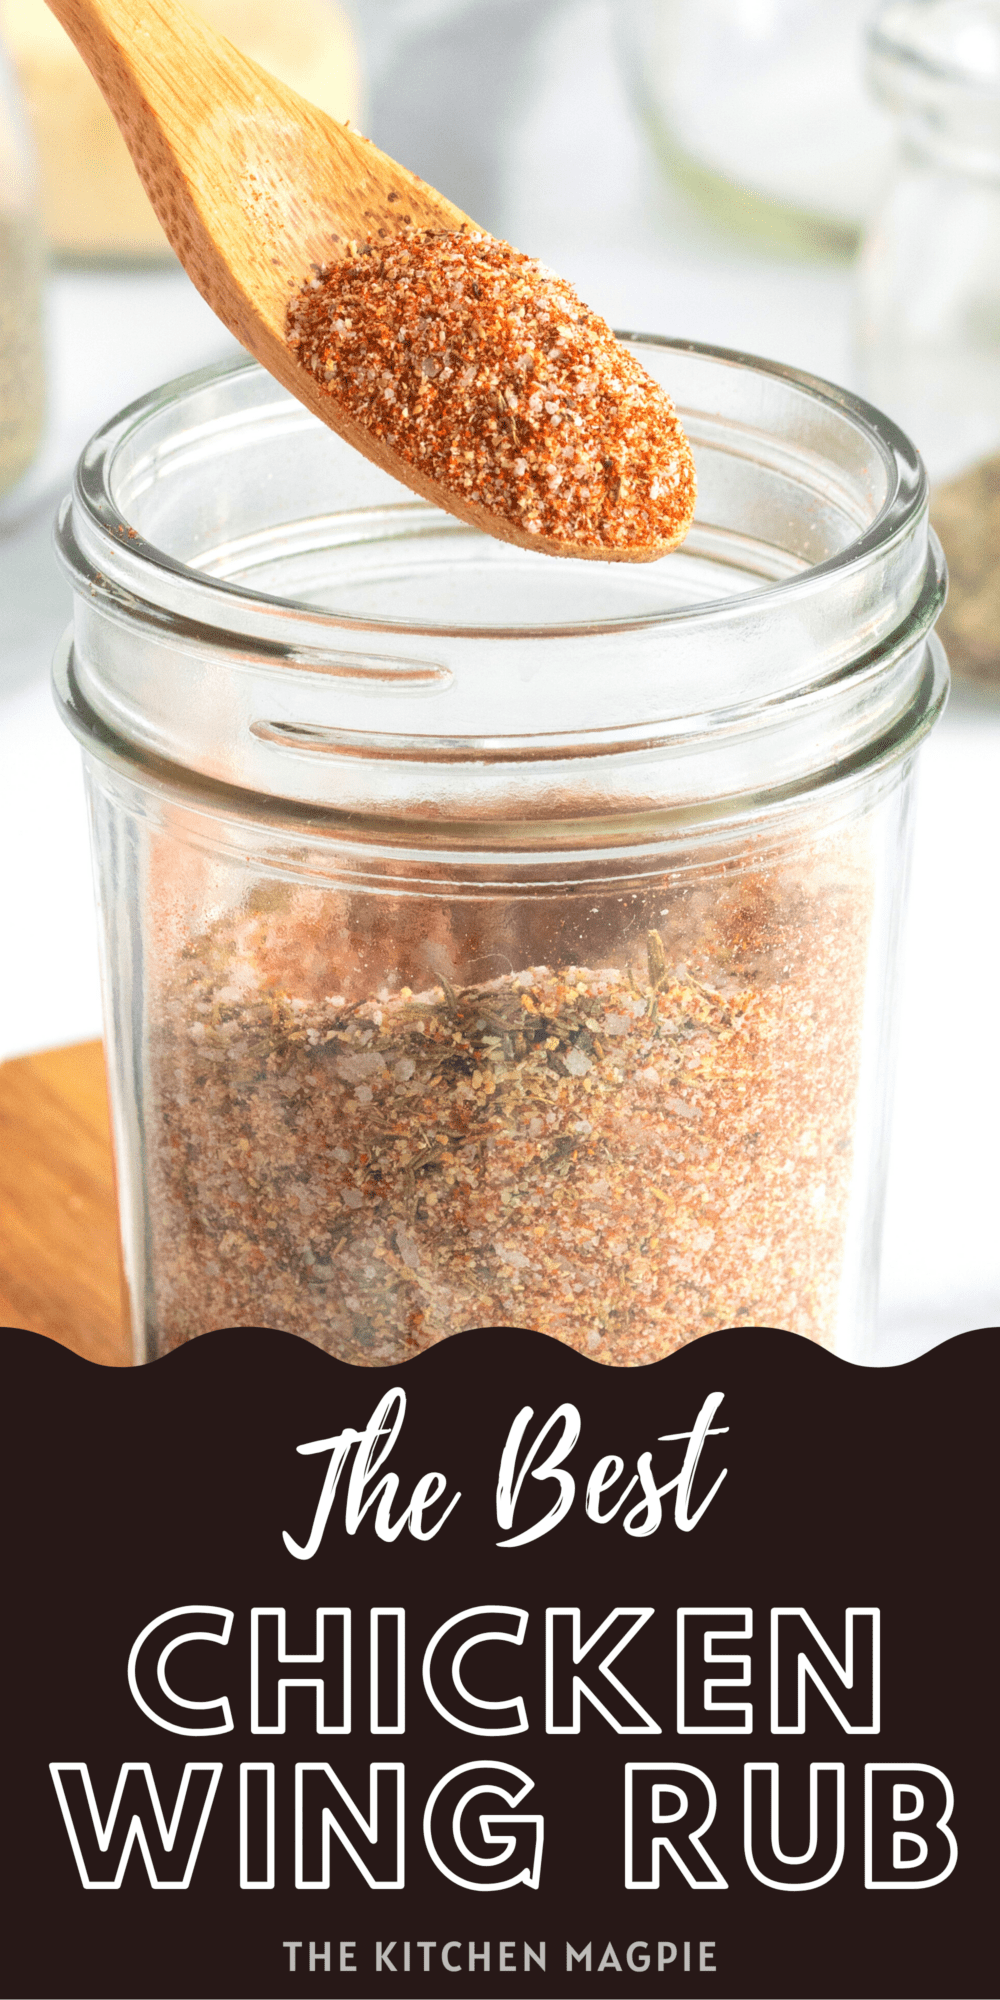 This chicken wing rub is the perfect easy seasoning for chicken wings. Grilled or baked chicken wings are excellent with this!